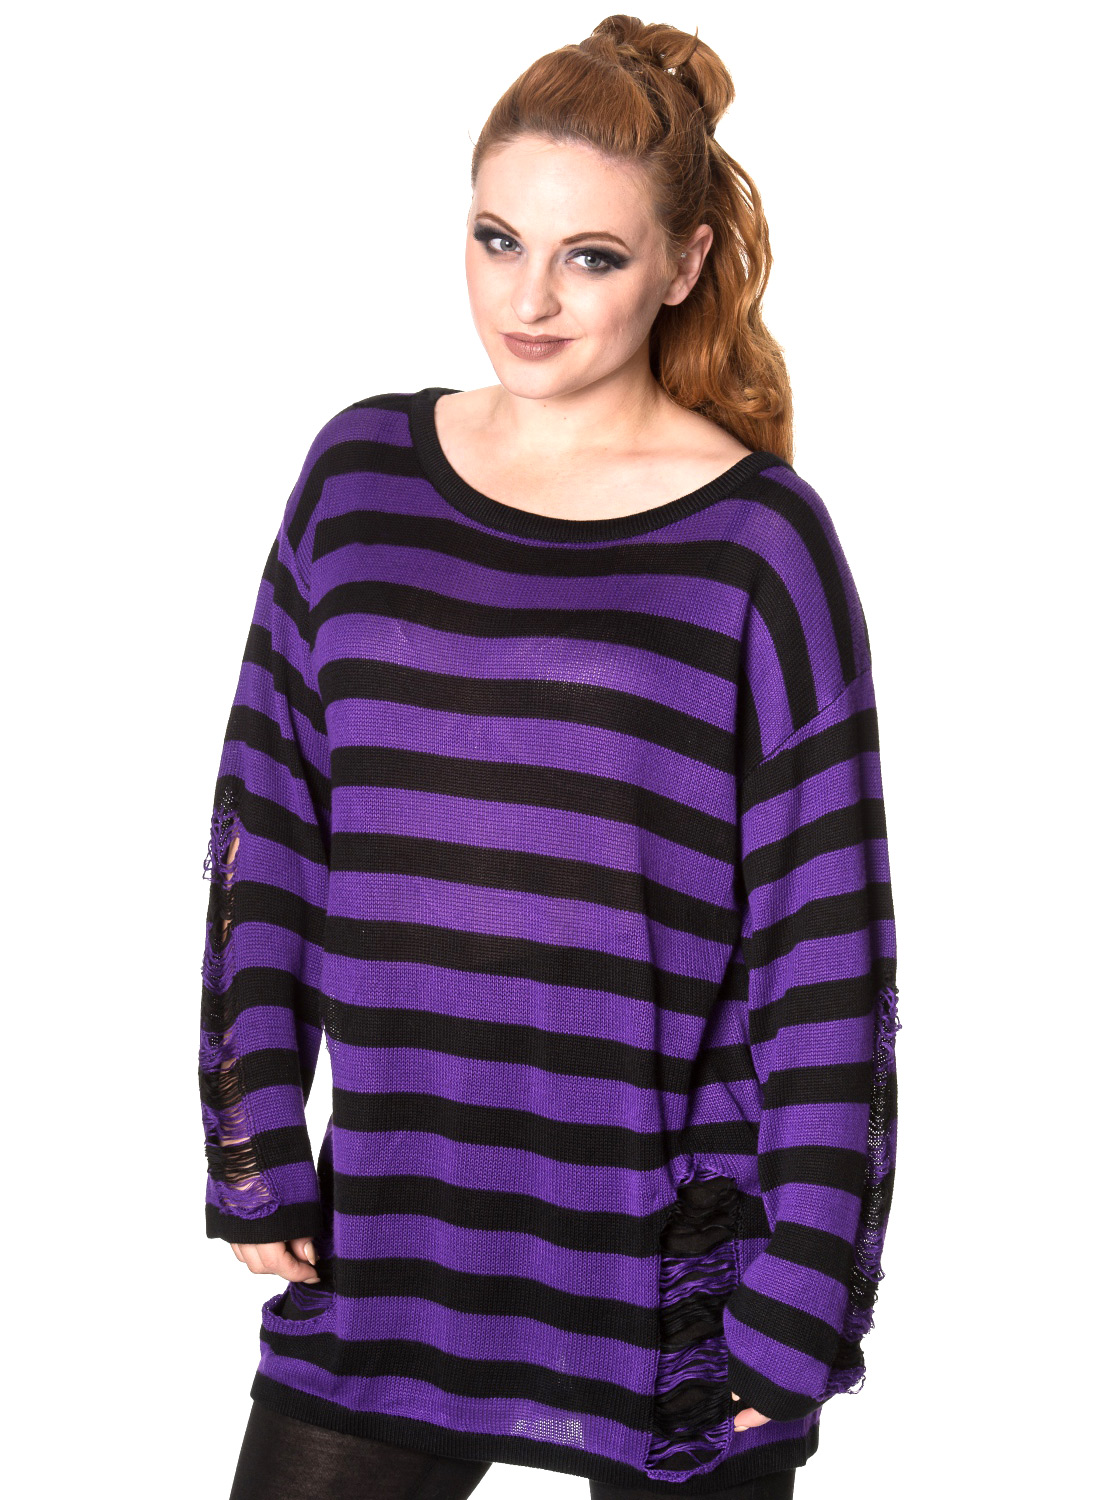 Pugsley Striped Knit Sweater